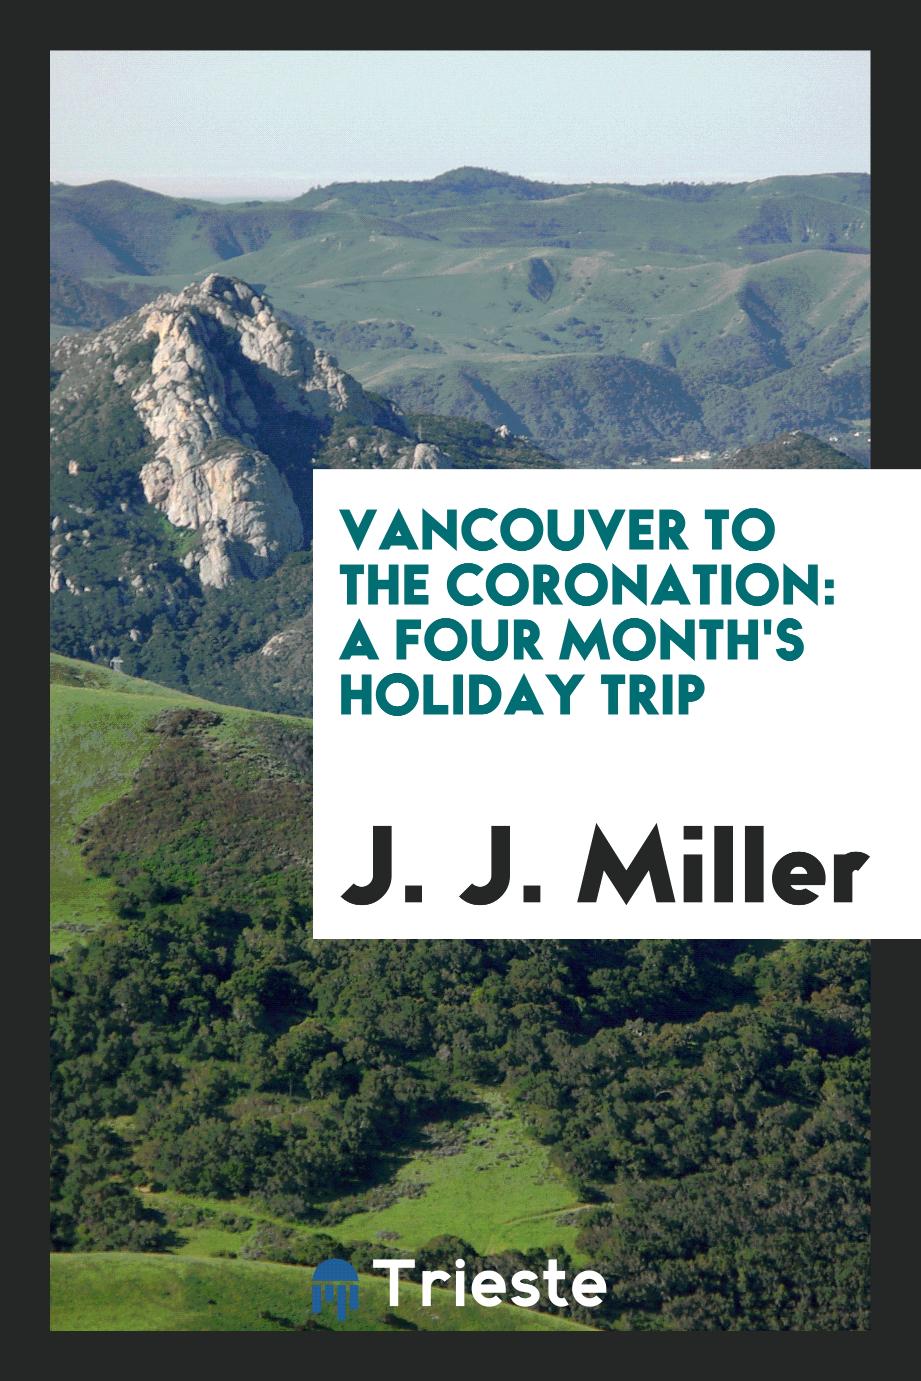 Vancouver to the Coronation: a Four Month's Holiday Trip